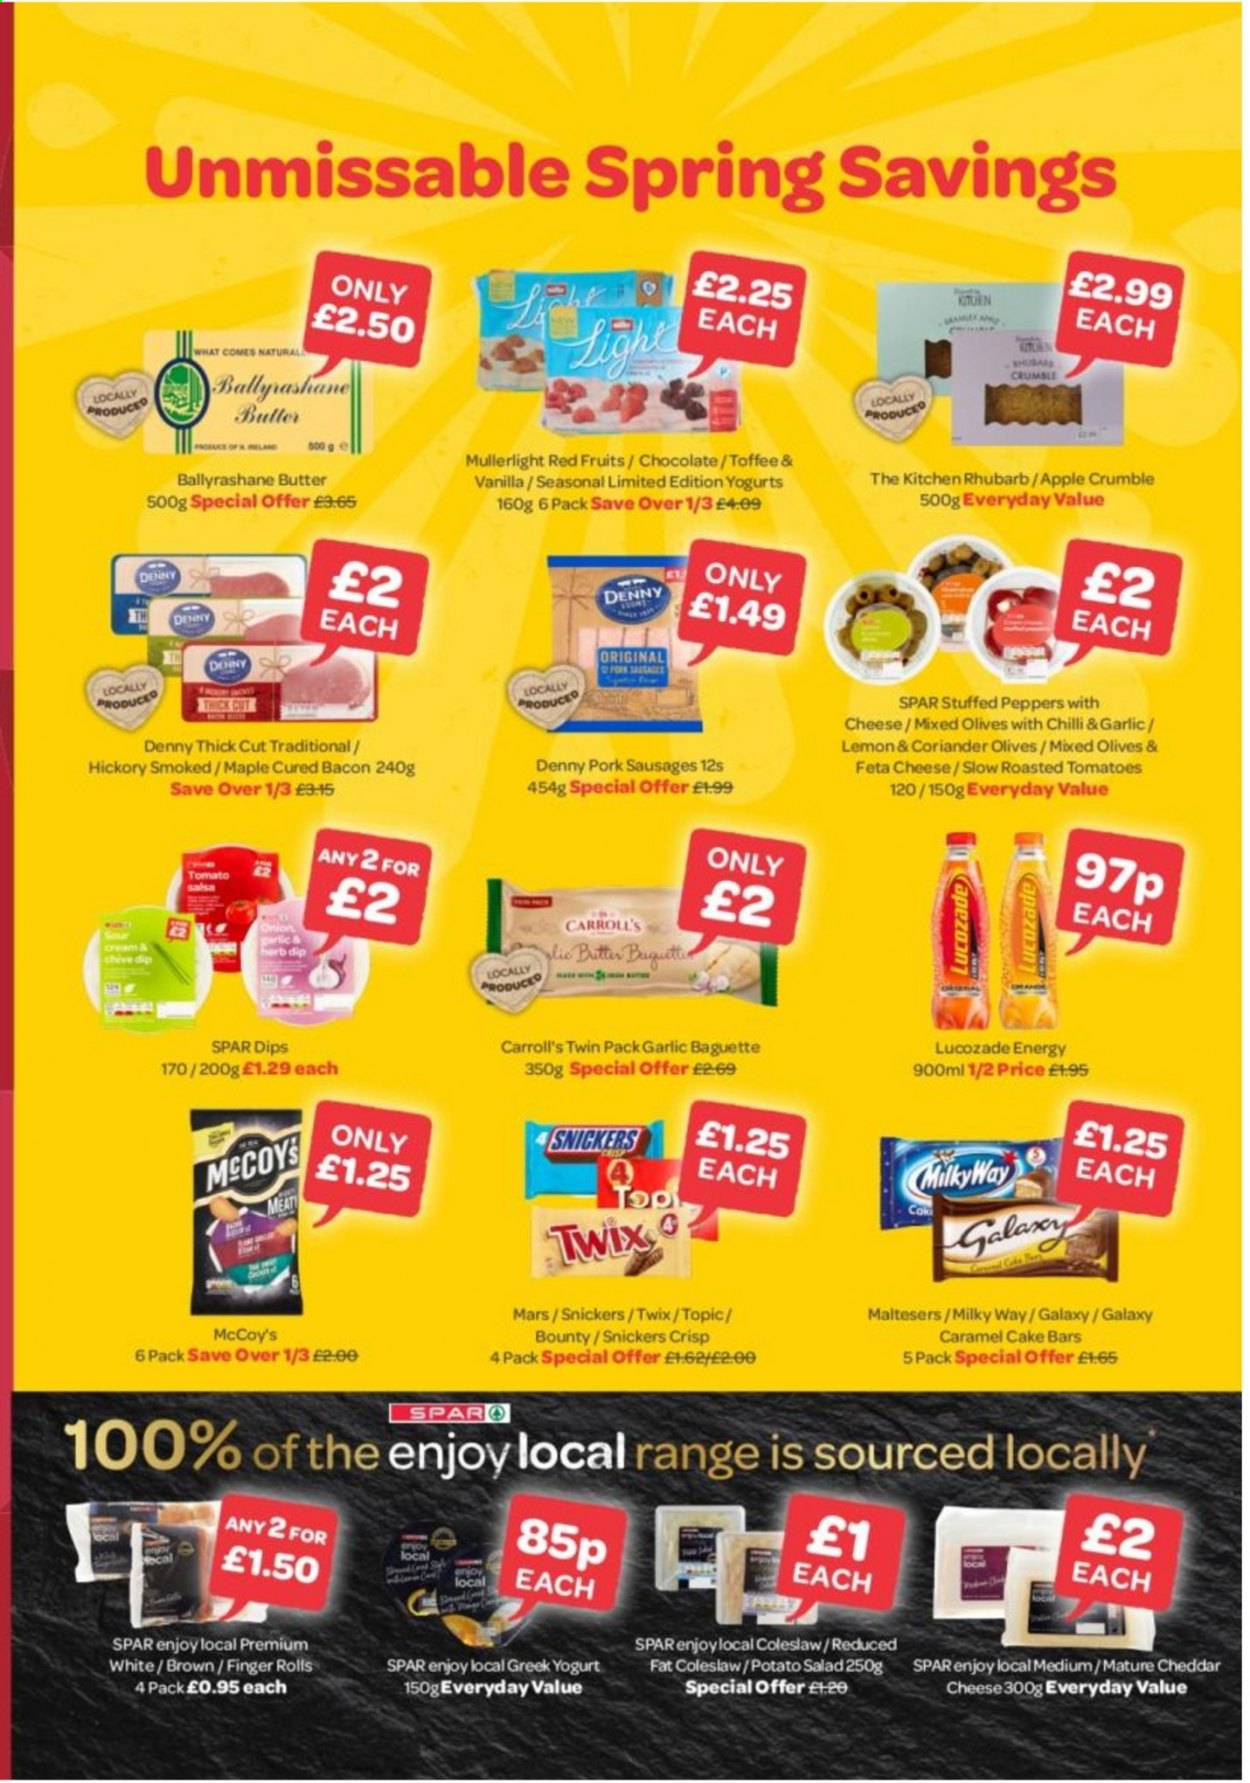 thumbnail - SPAR offer  - 26/04/2021 - 16/05/2021 - Sales products - garlic, rhubarb, tomatoes, onion, salad, peppers, baguette, cake, coleslaw, bacon, sausage, potato salad, feta, cheddar, cheese, greek yoghurt, yoghurt, butter, dip, Twix, Snickers, Milky Way, Maltesers, Mars, chocolate, toffee, Bounty, olives, herbs, coriander, caramel, salsa, Lucozade. Page 3.